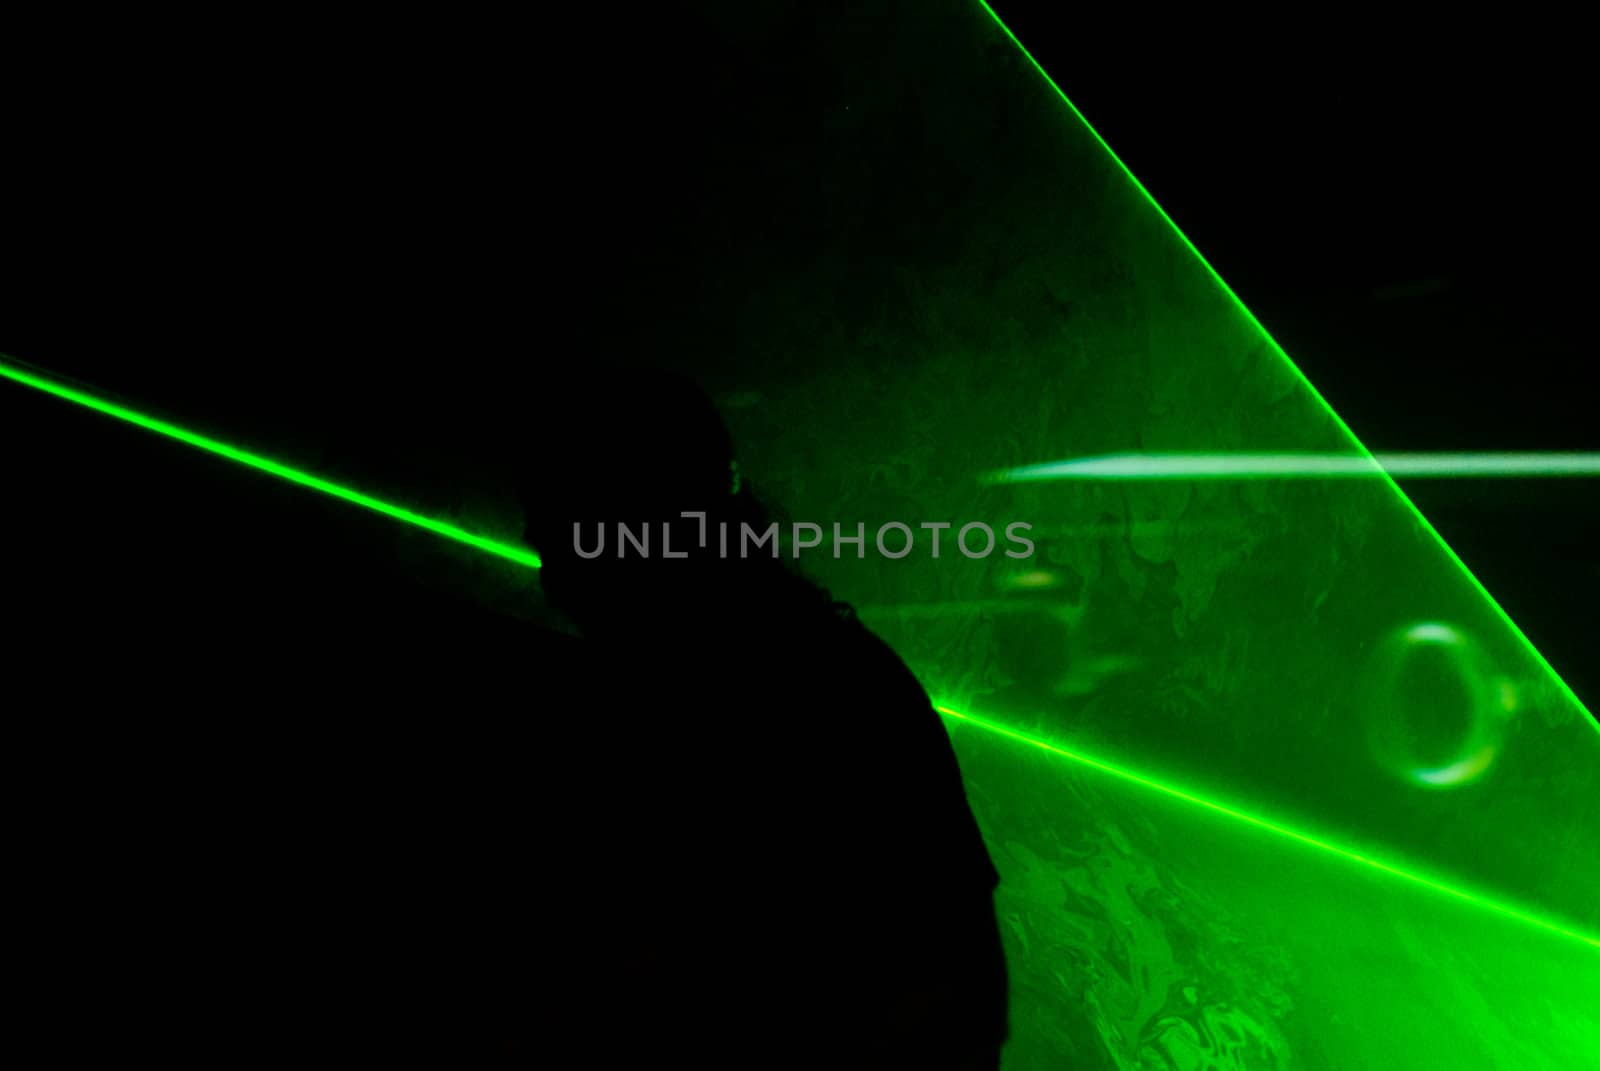 Silhouette of a man playing guitar surrounded by green lasers.